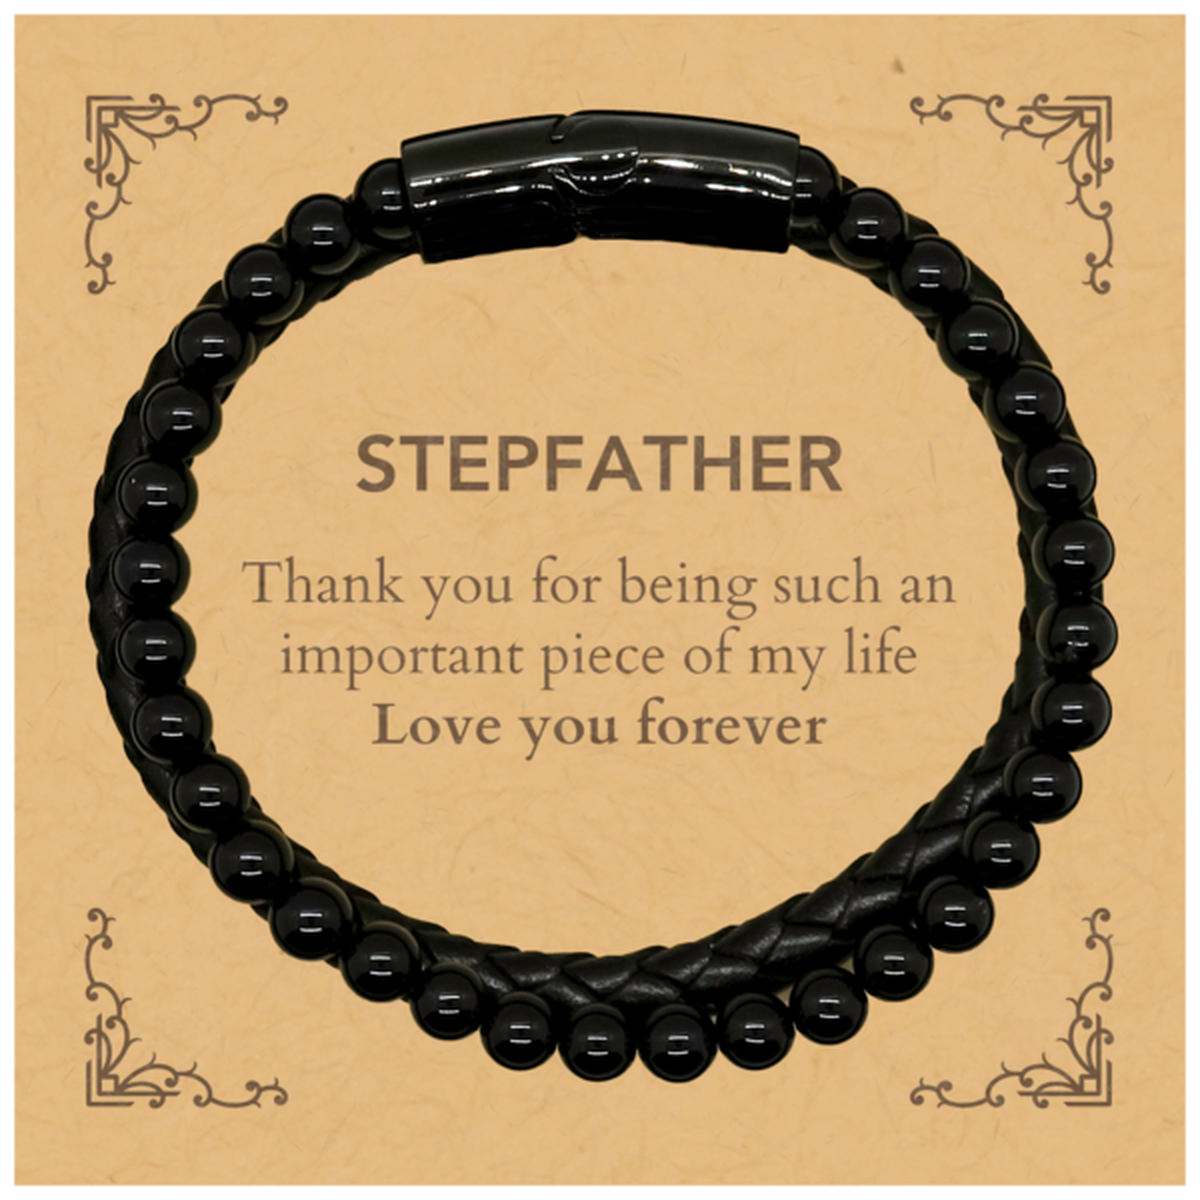 Appropriate Stepfather Stone Leather Bracelets Epic Birthday Gifts for Stepfather Thank you for being such an important piece of my life Stepfather Christmas Mothers Fathers Day